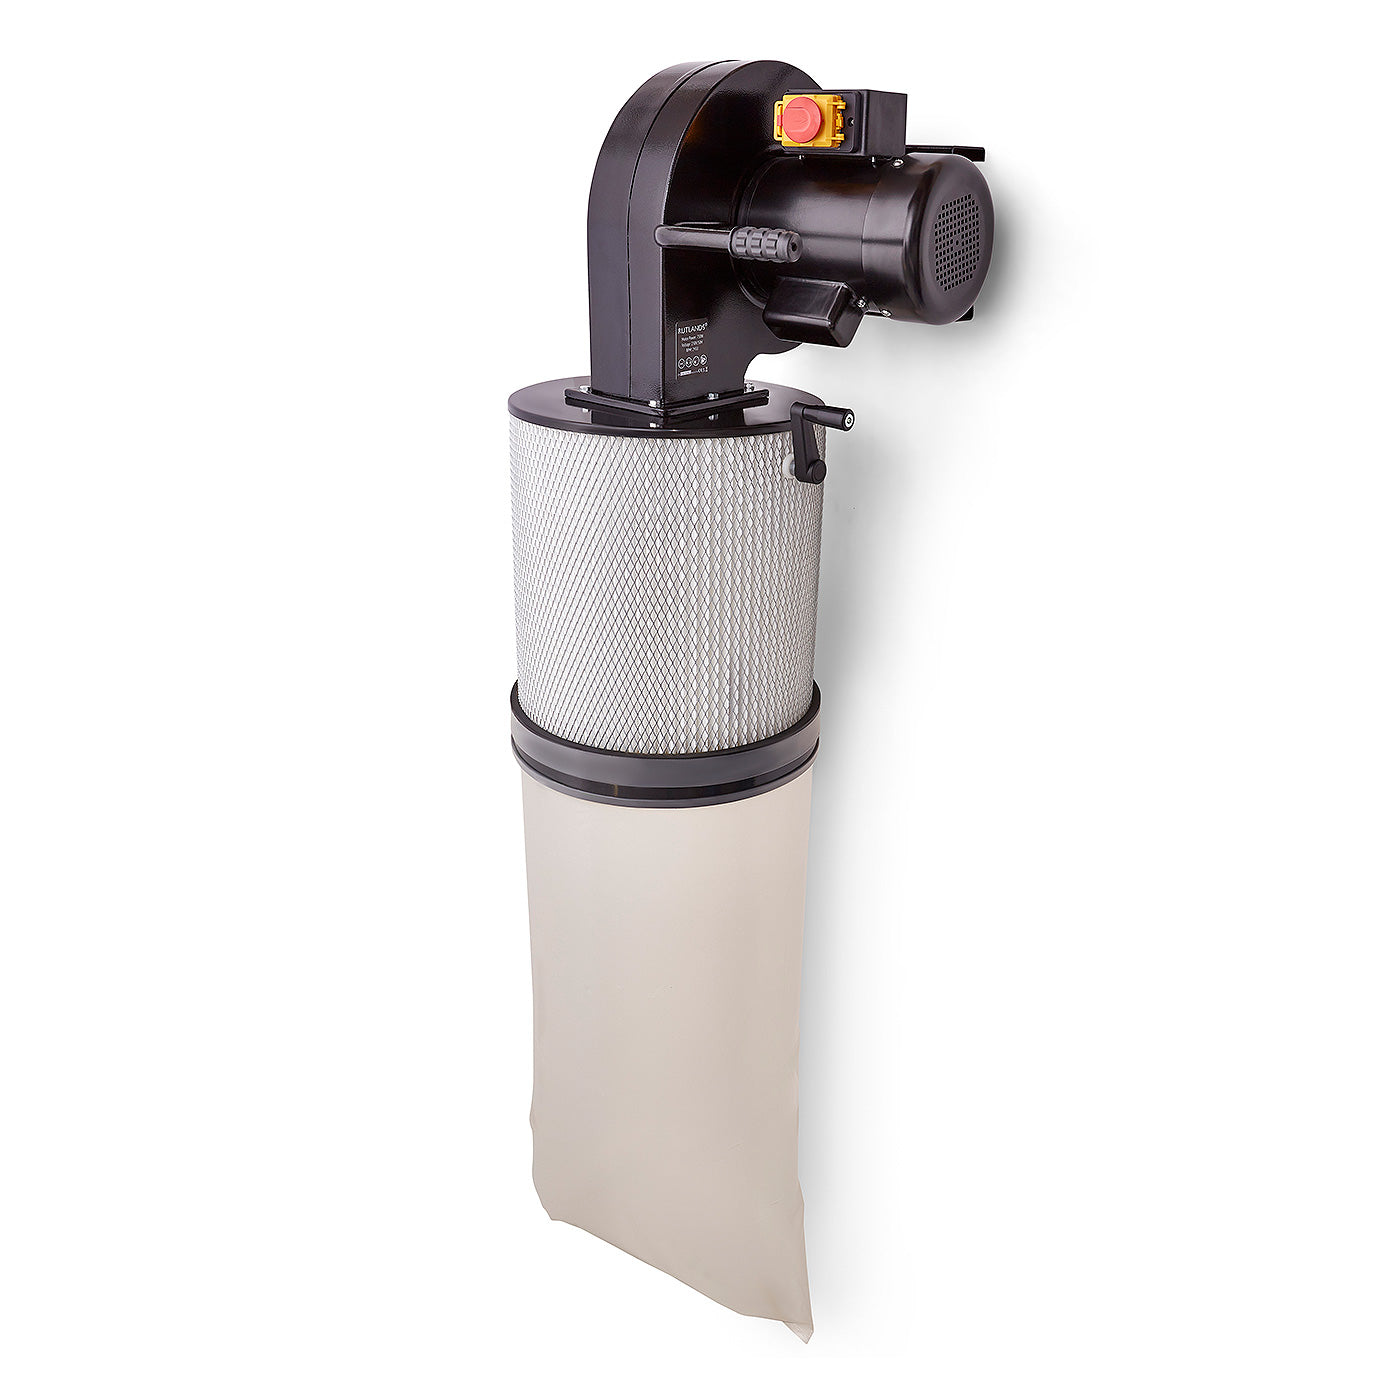 Factory Specials - Wall-Mount Fine Filter Dust Collector